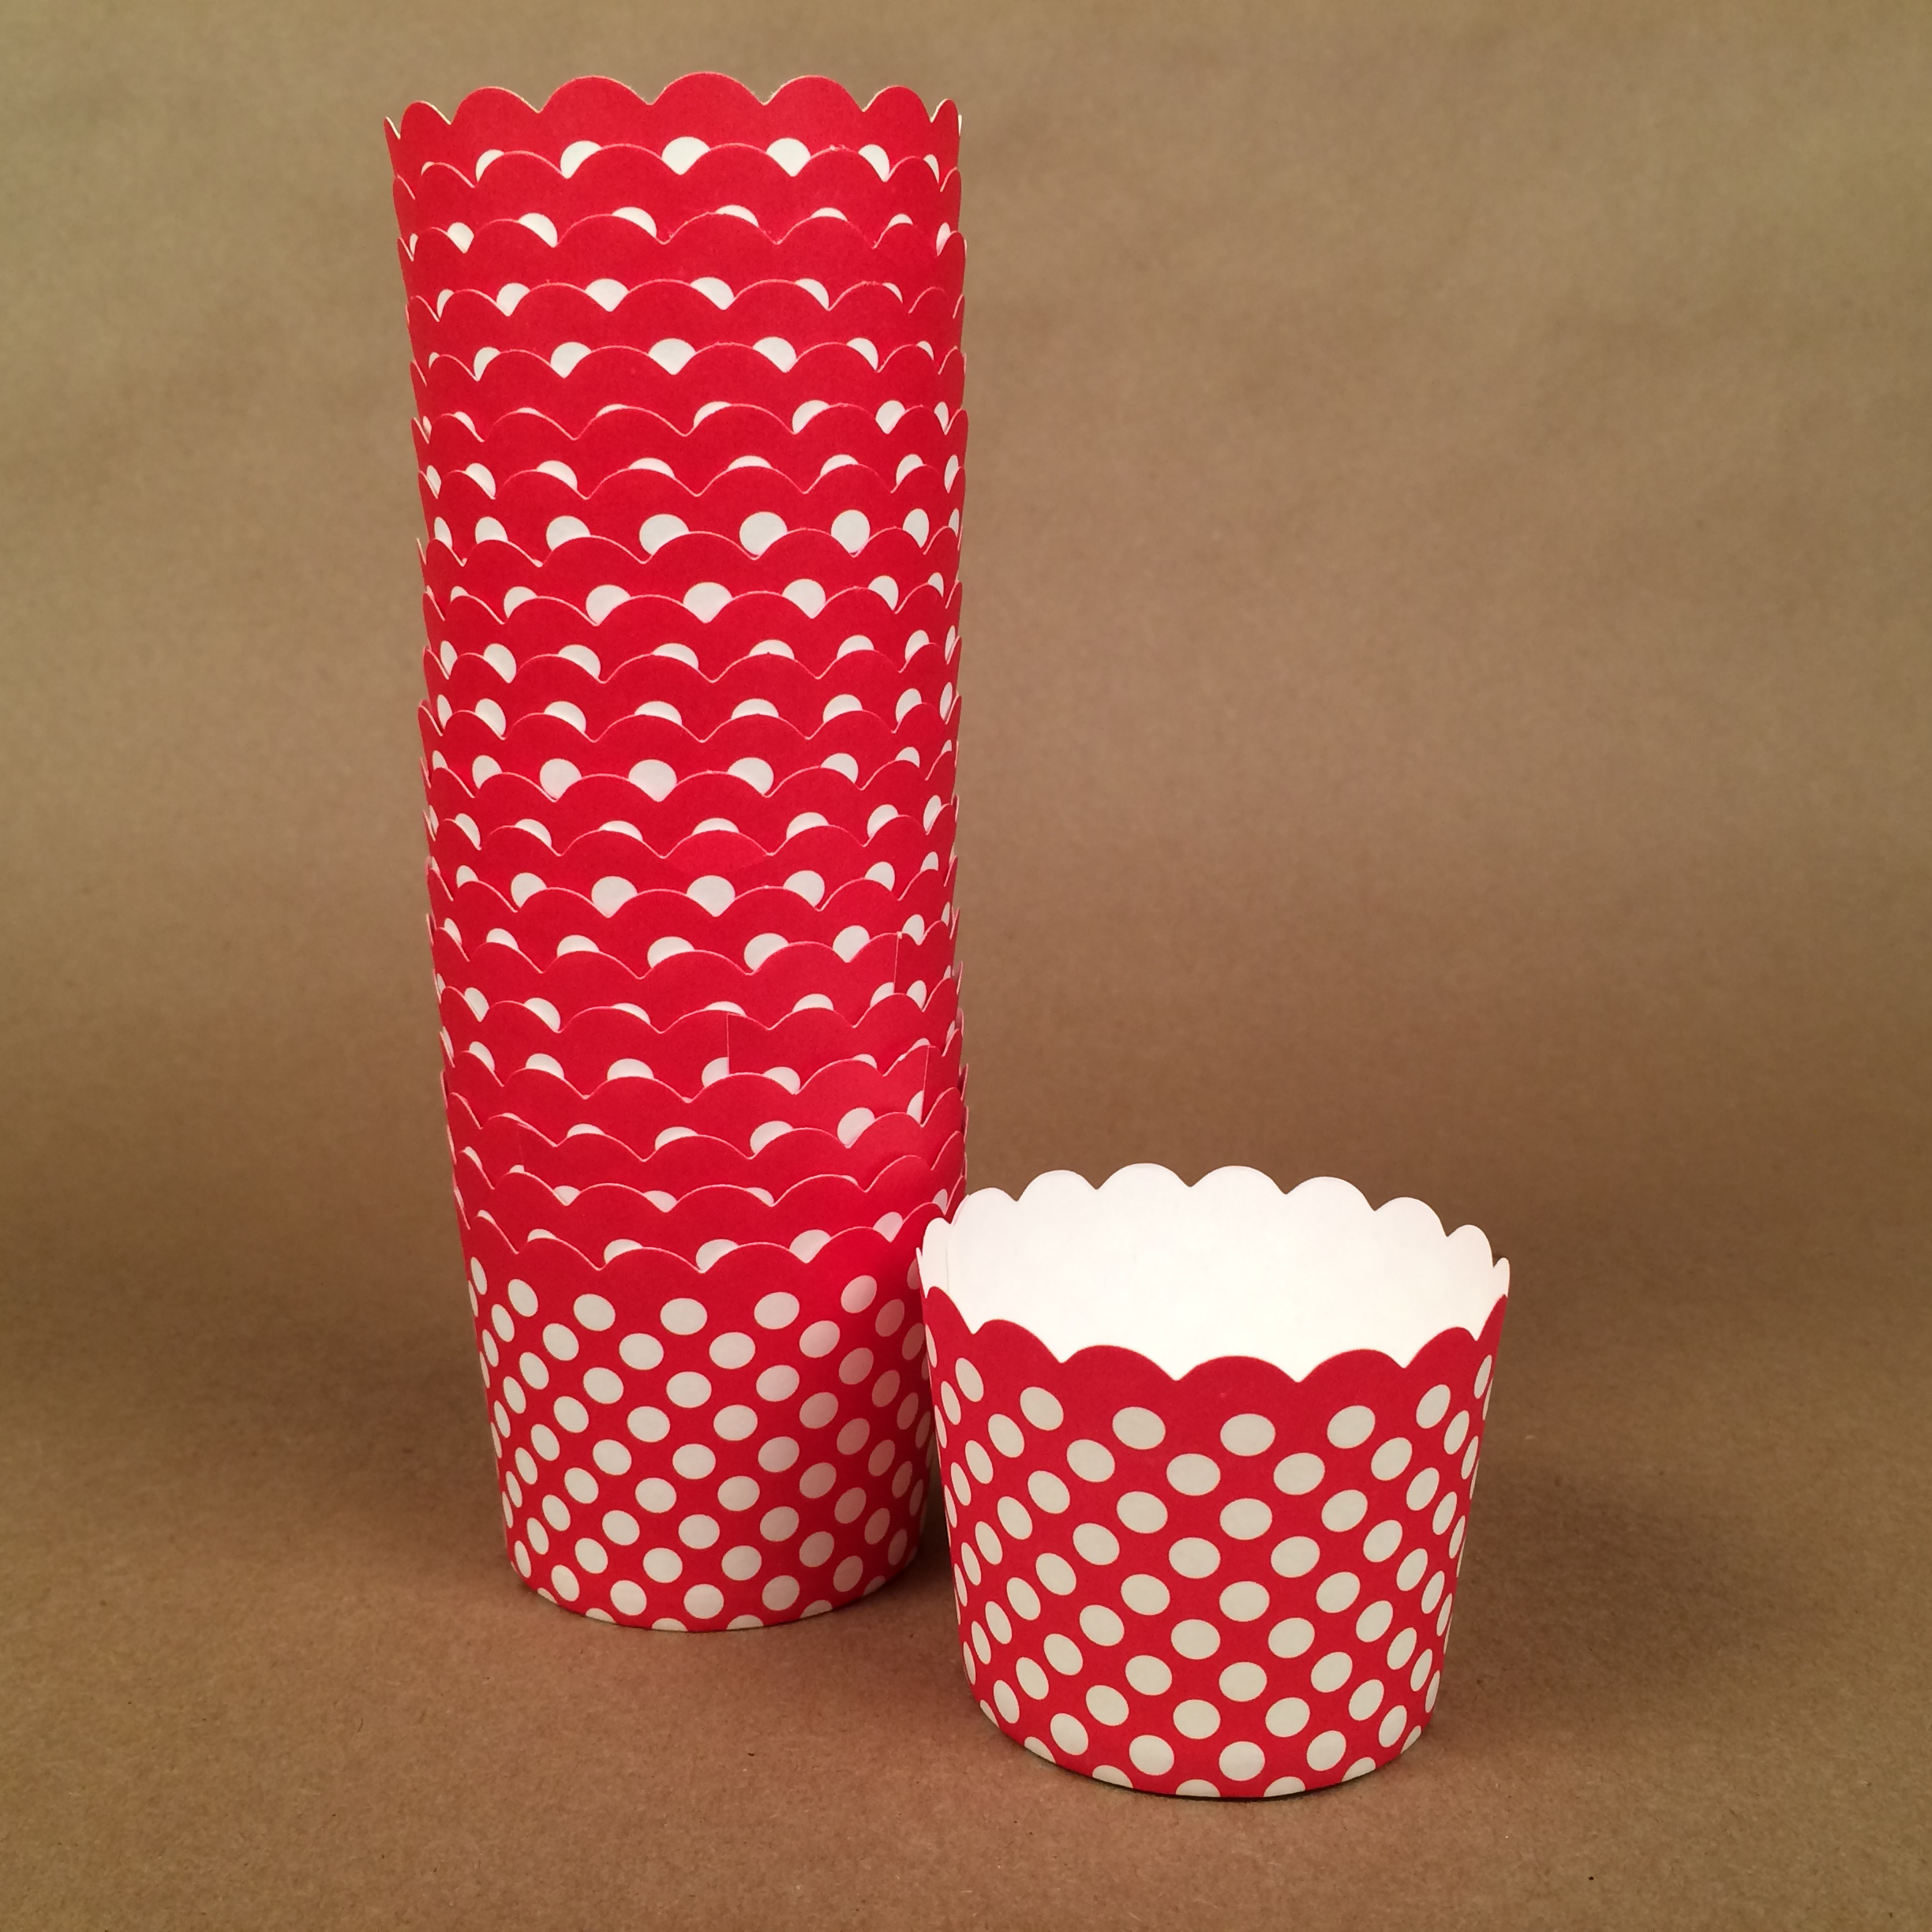 3d Toddlercon Anal Porn - Red Dot Paper Baking Cup â€“ Kingsley Event Supply